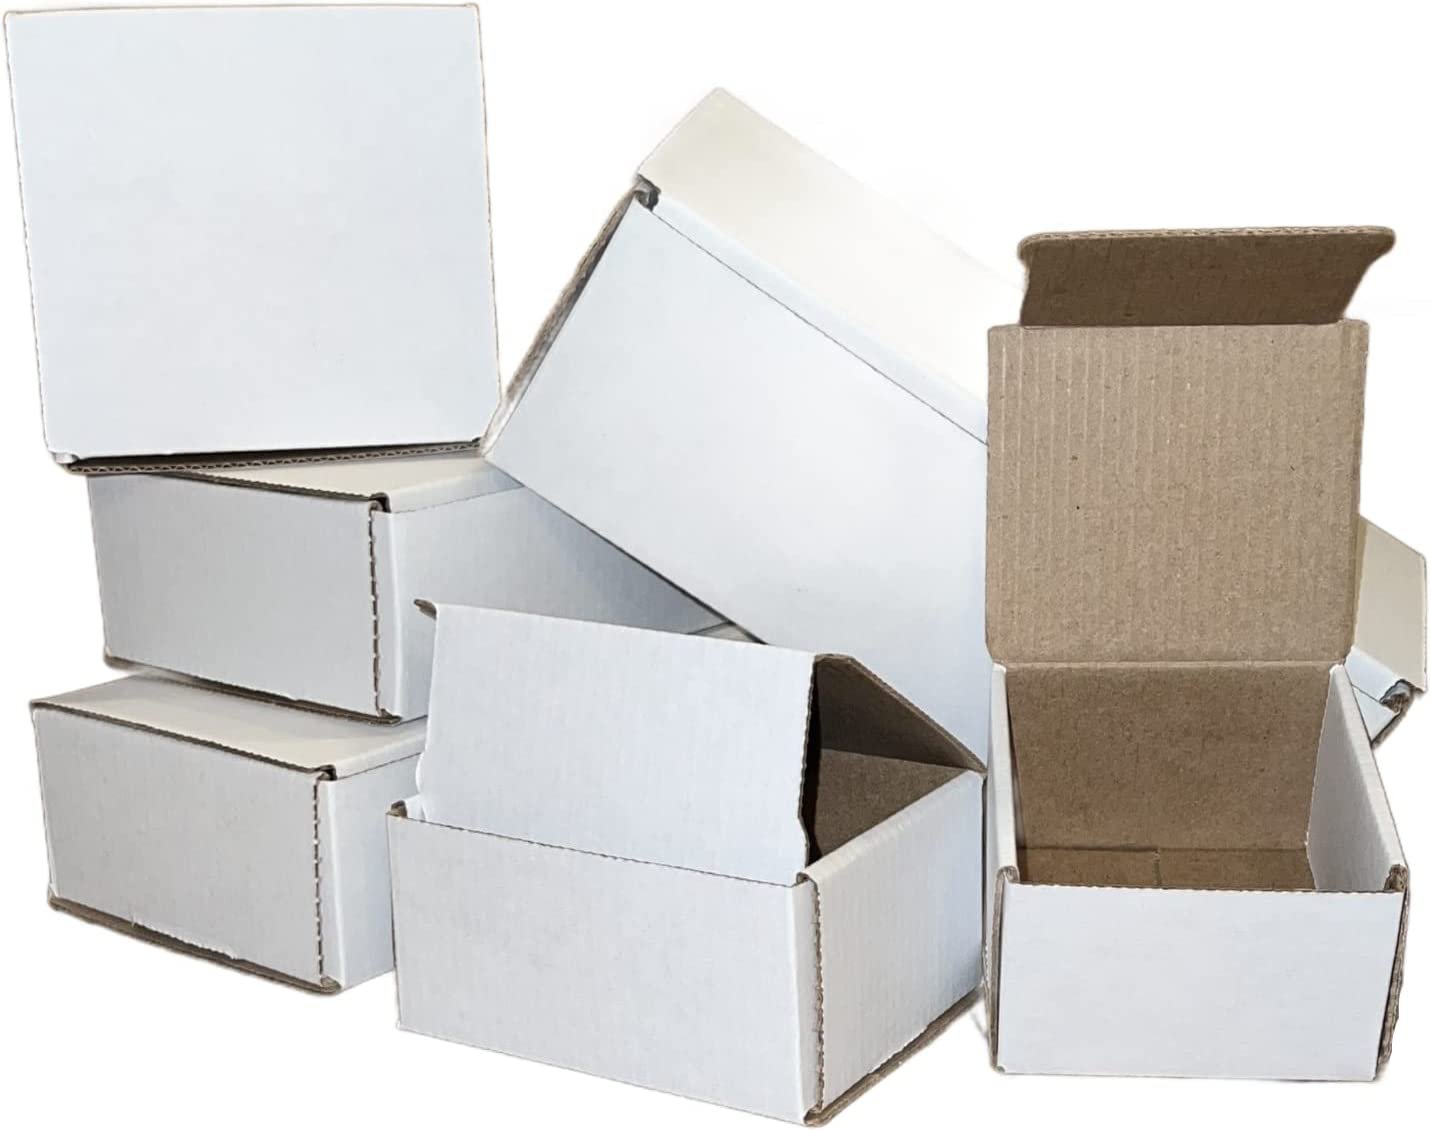 100 6x3x3 White Cardboard Paper Boxes Mailing Packing Shipping Box Corrugated...